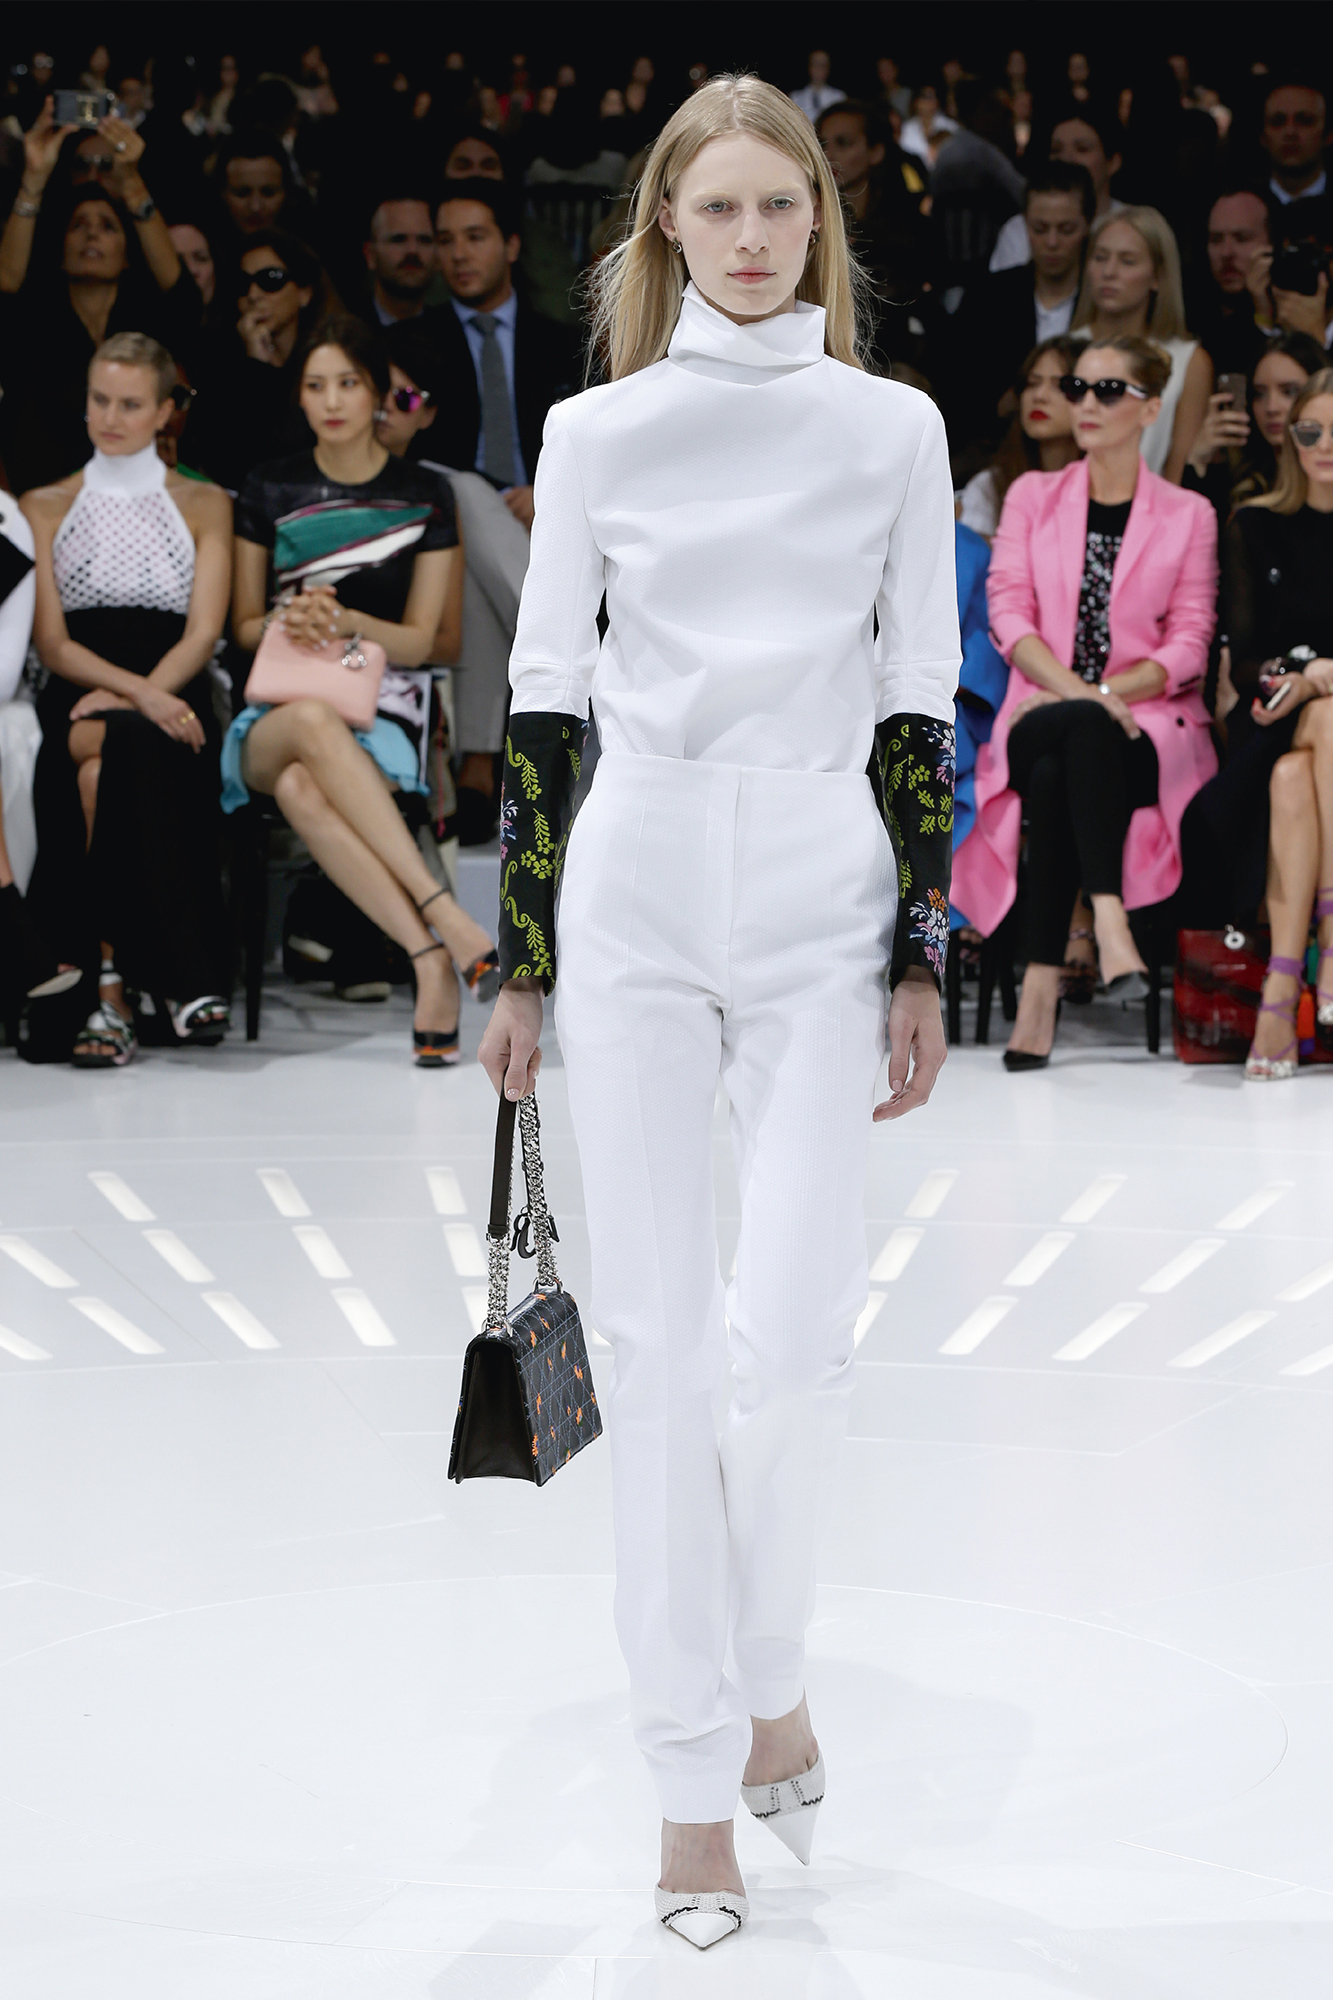 Christian Dior Haute Couture Spring-Summer Ready To Wear Dresses & Accessories Collection 2015-16 (5)